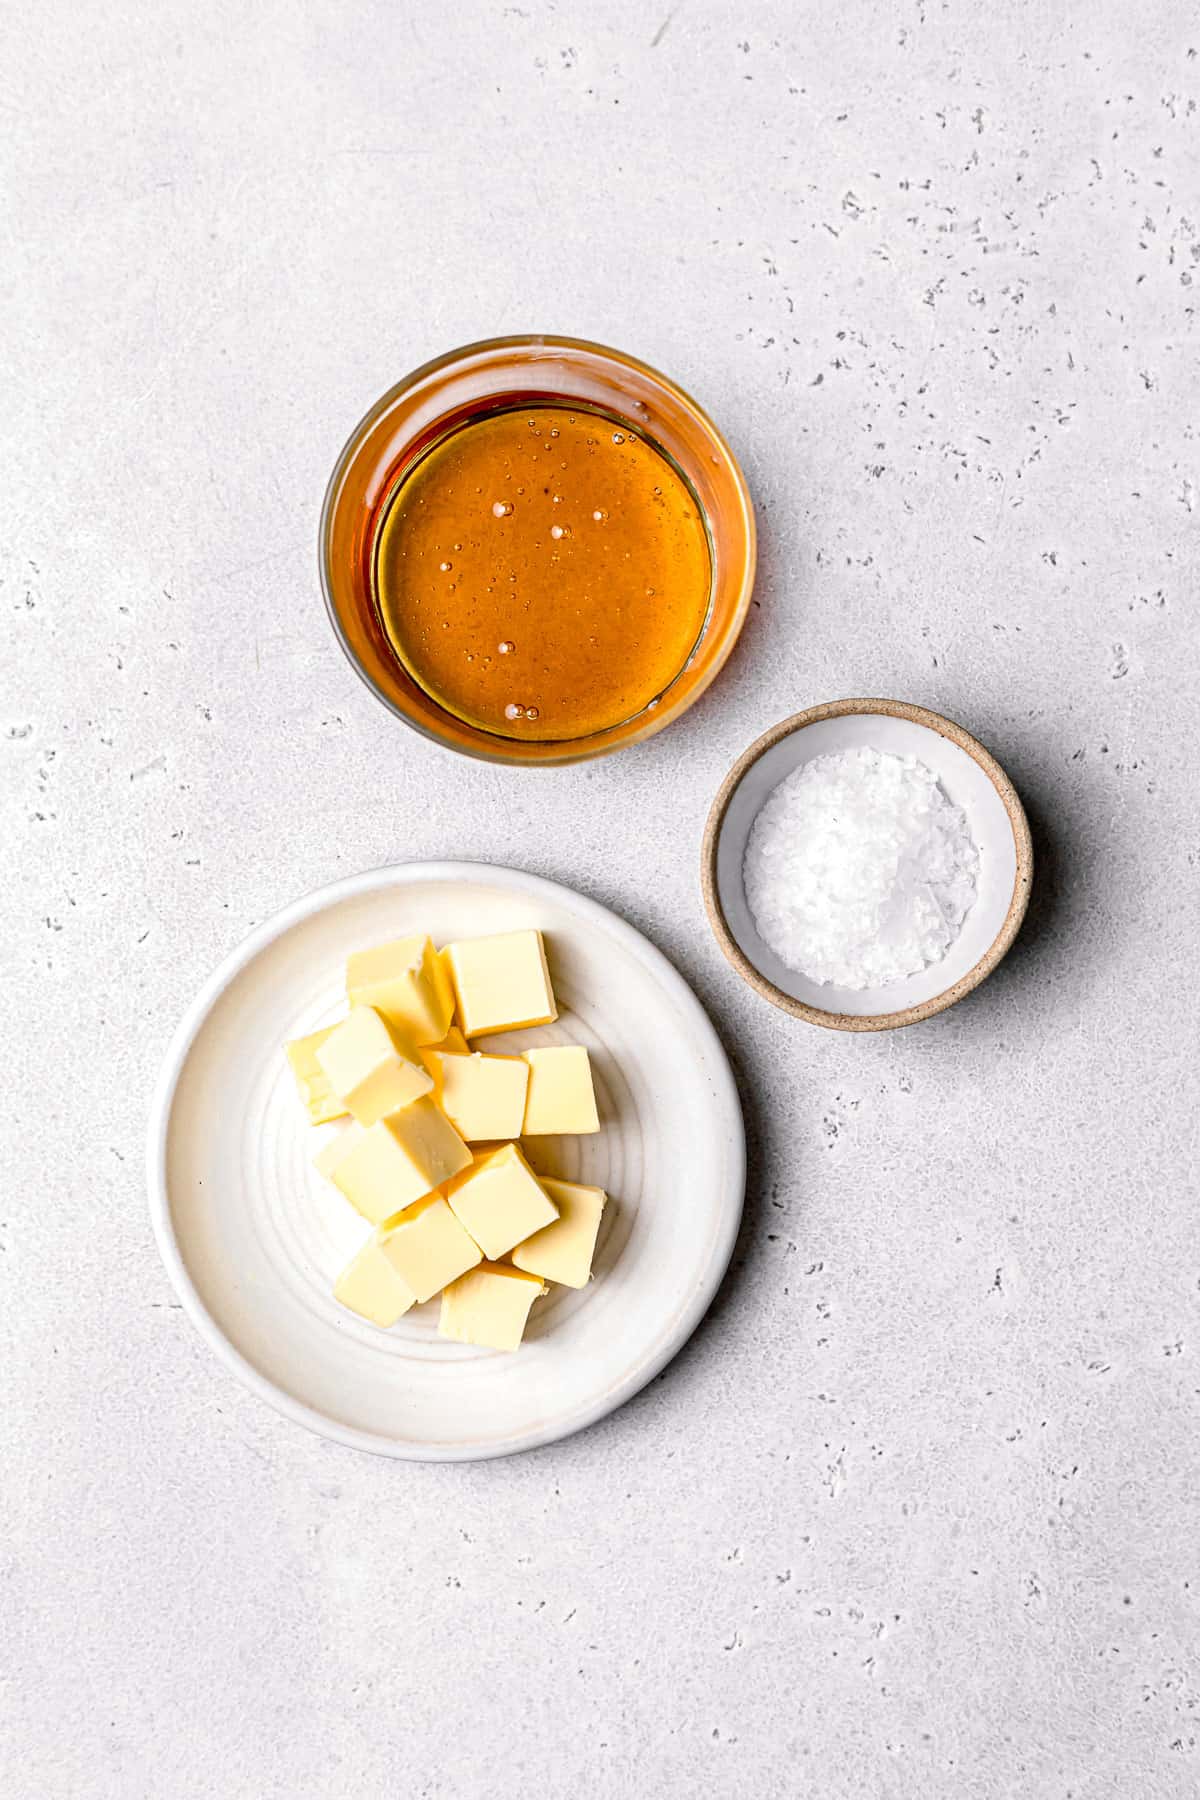 ingredients for honey butter